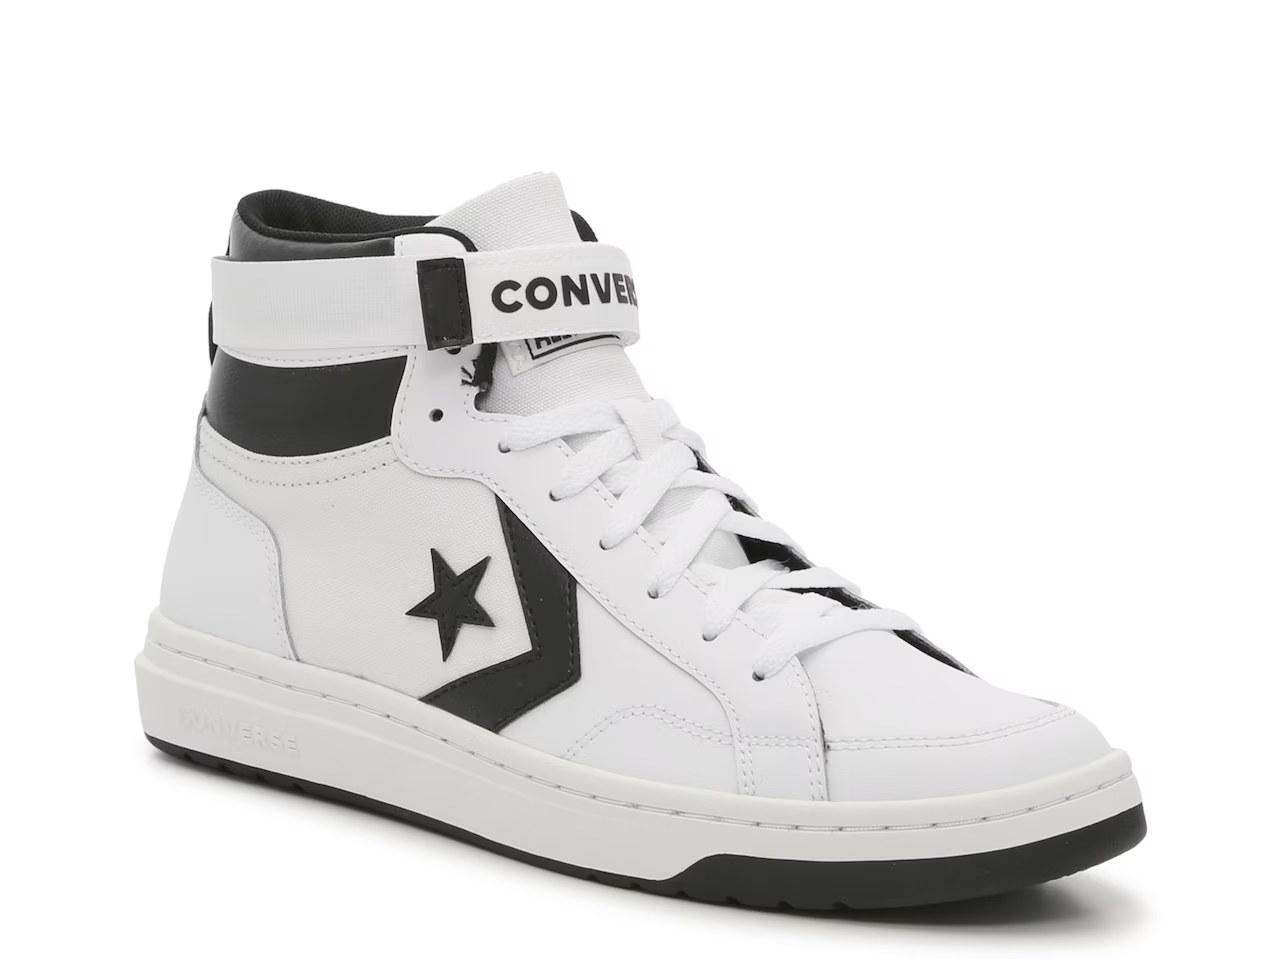 Add the perfect footwear to your style
with high top sneakers for men